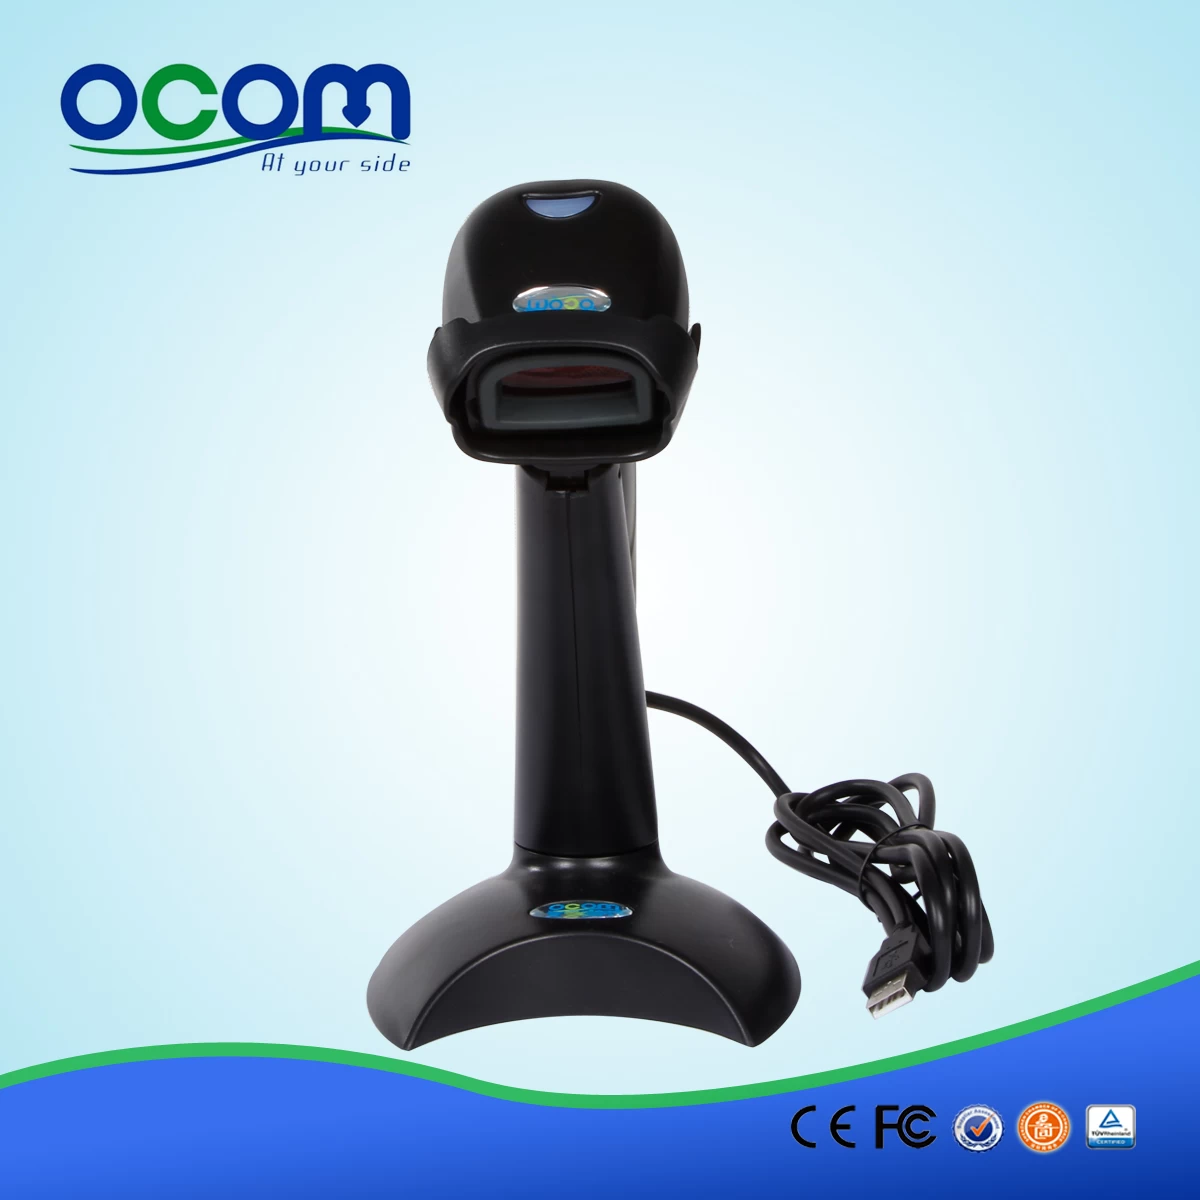 Handheld laser barcode scanner with stand